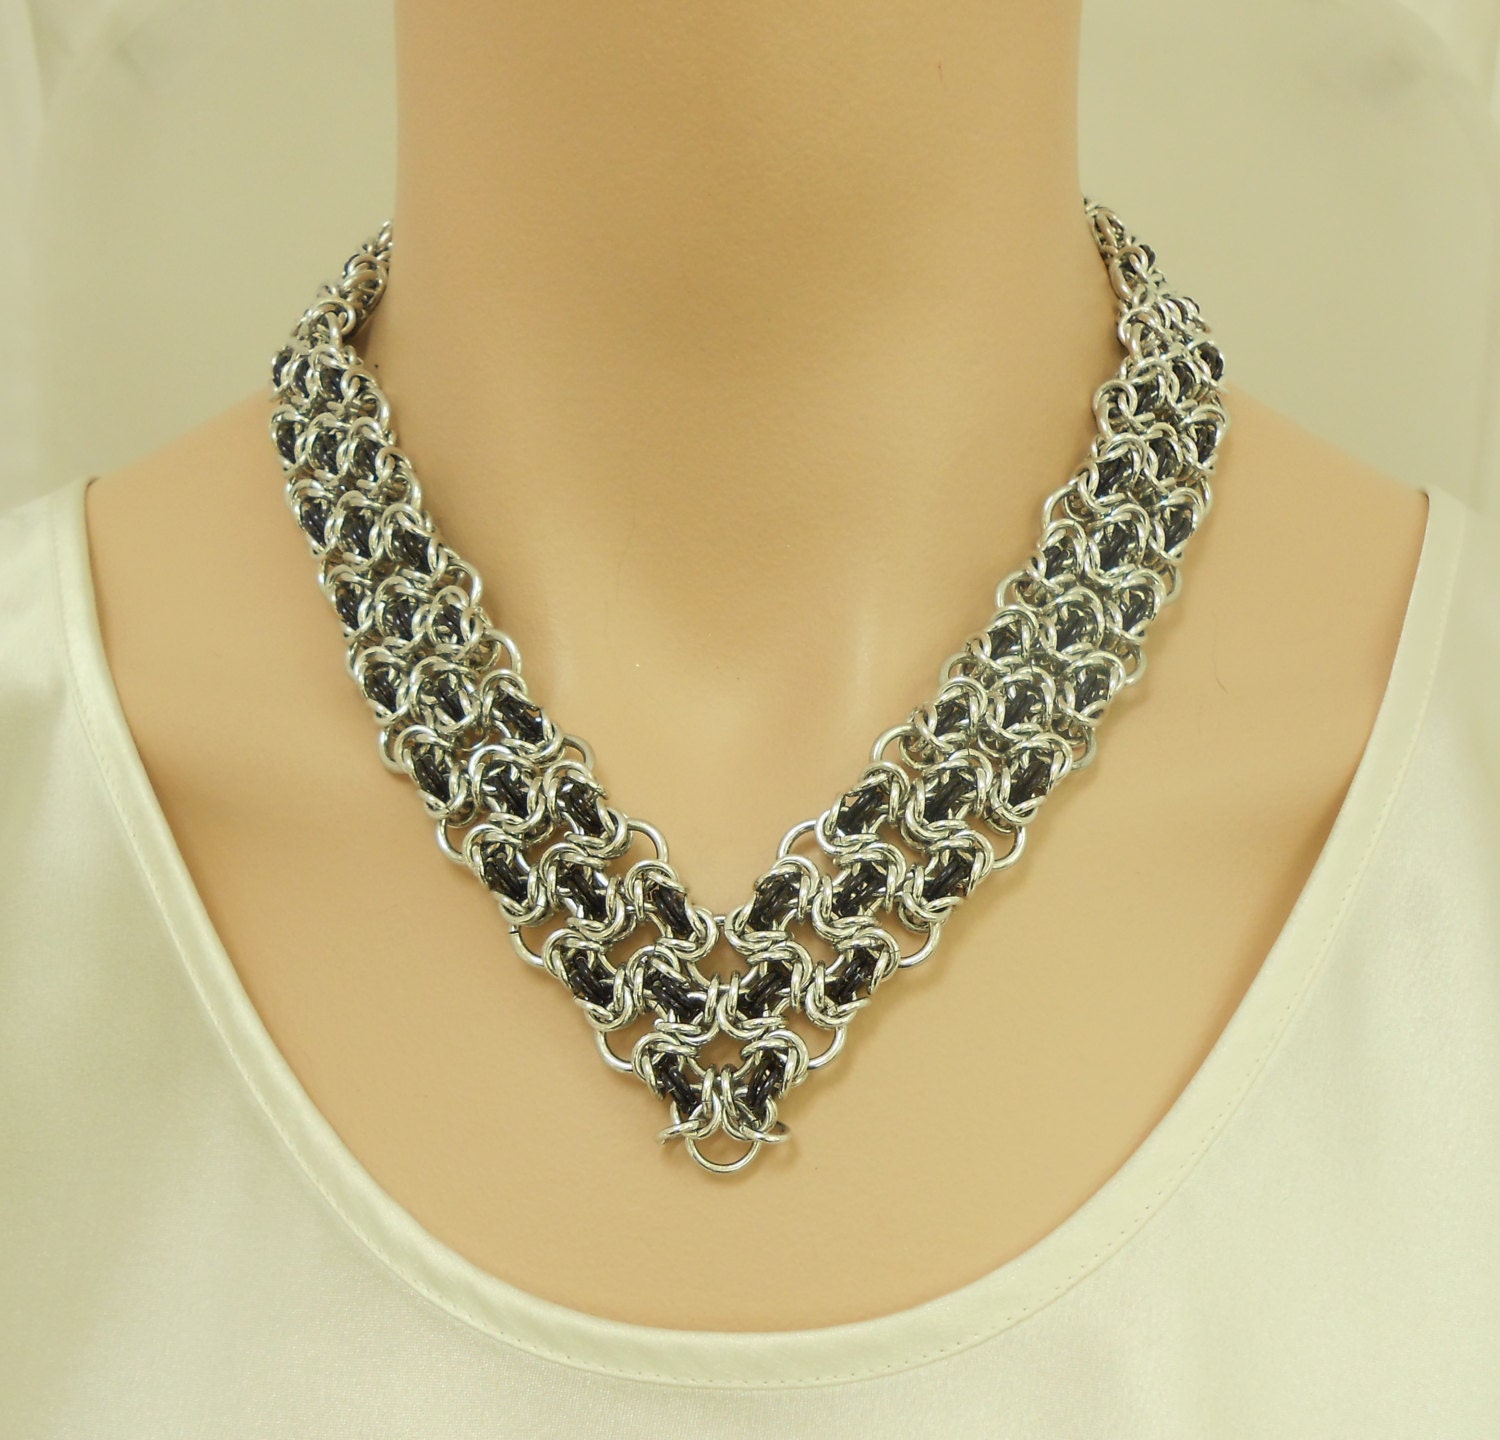 Chain maille V collar necklace in silver and black